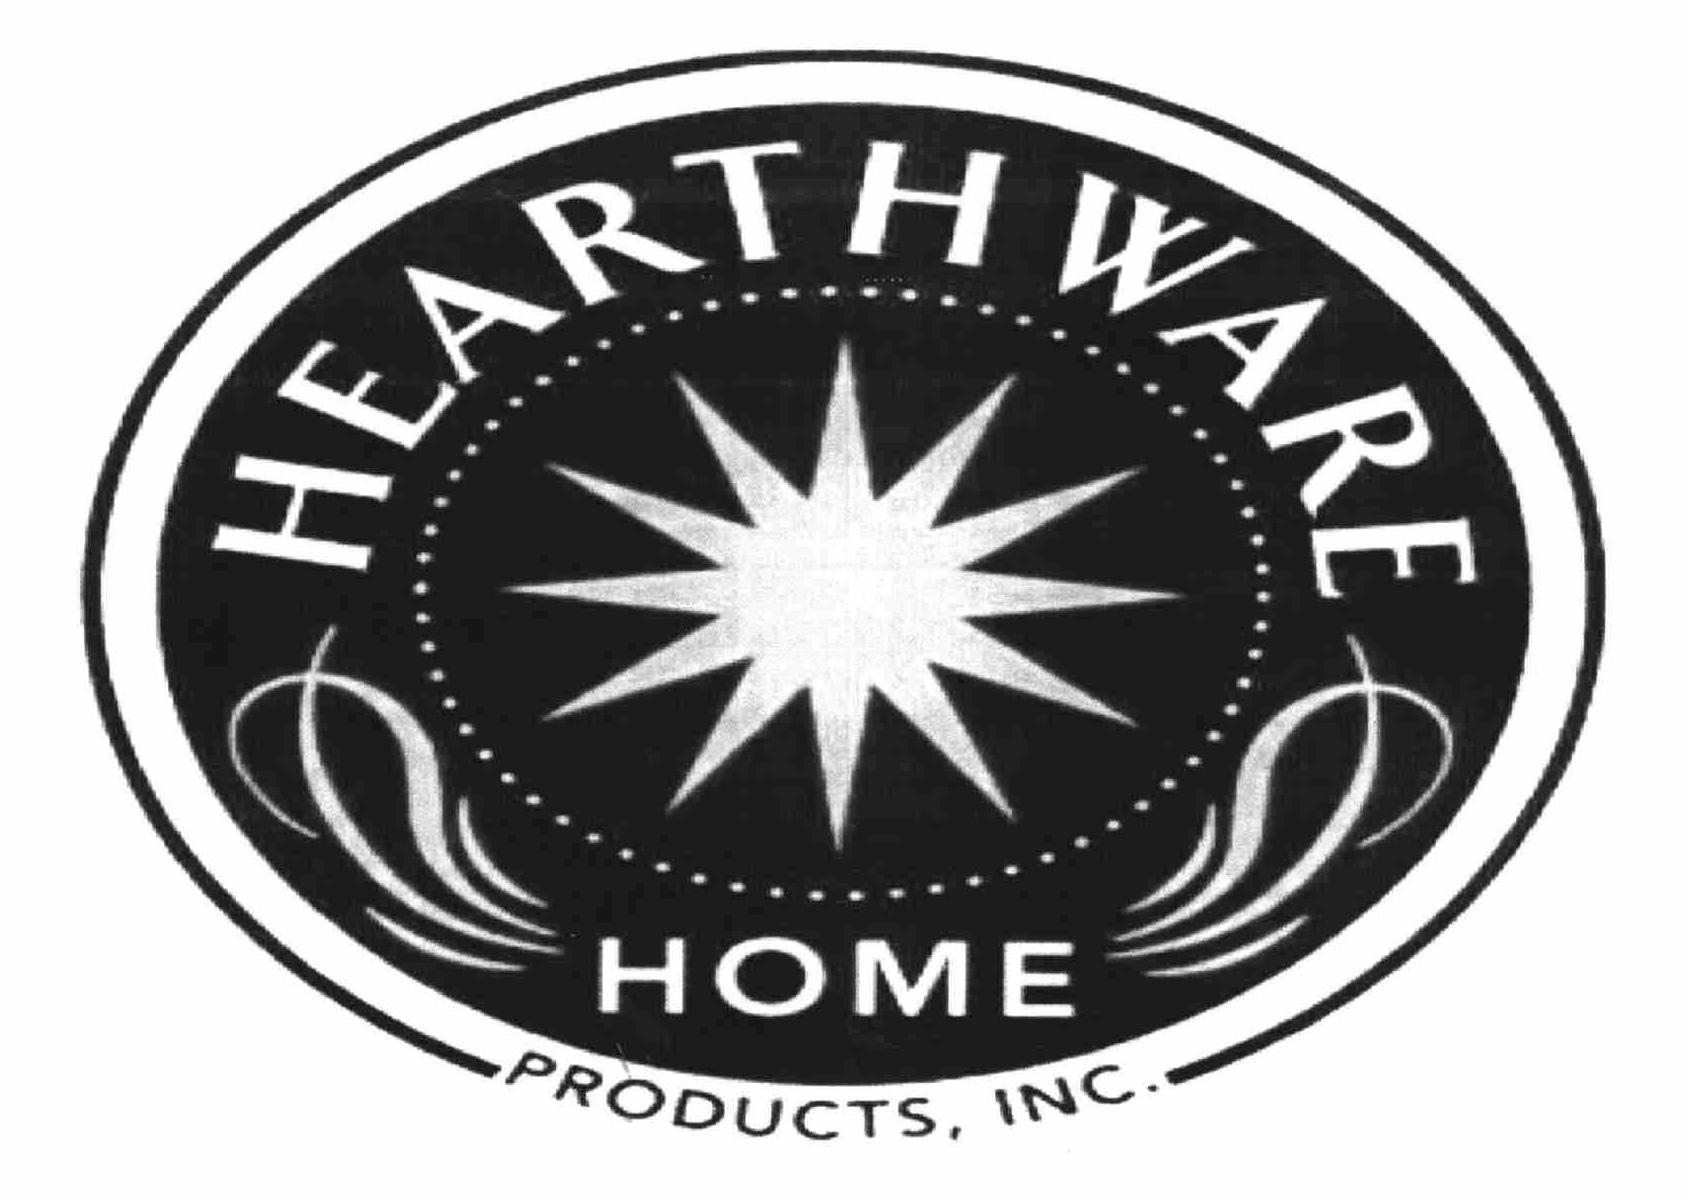  HEARTHWARE HOME PRODUCTS, INC